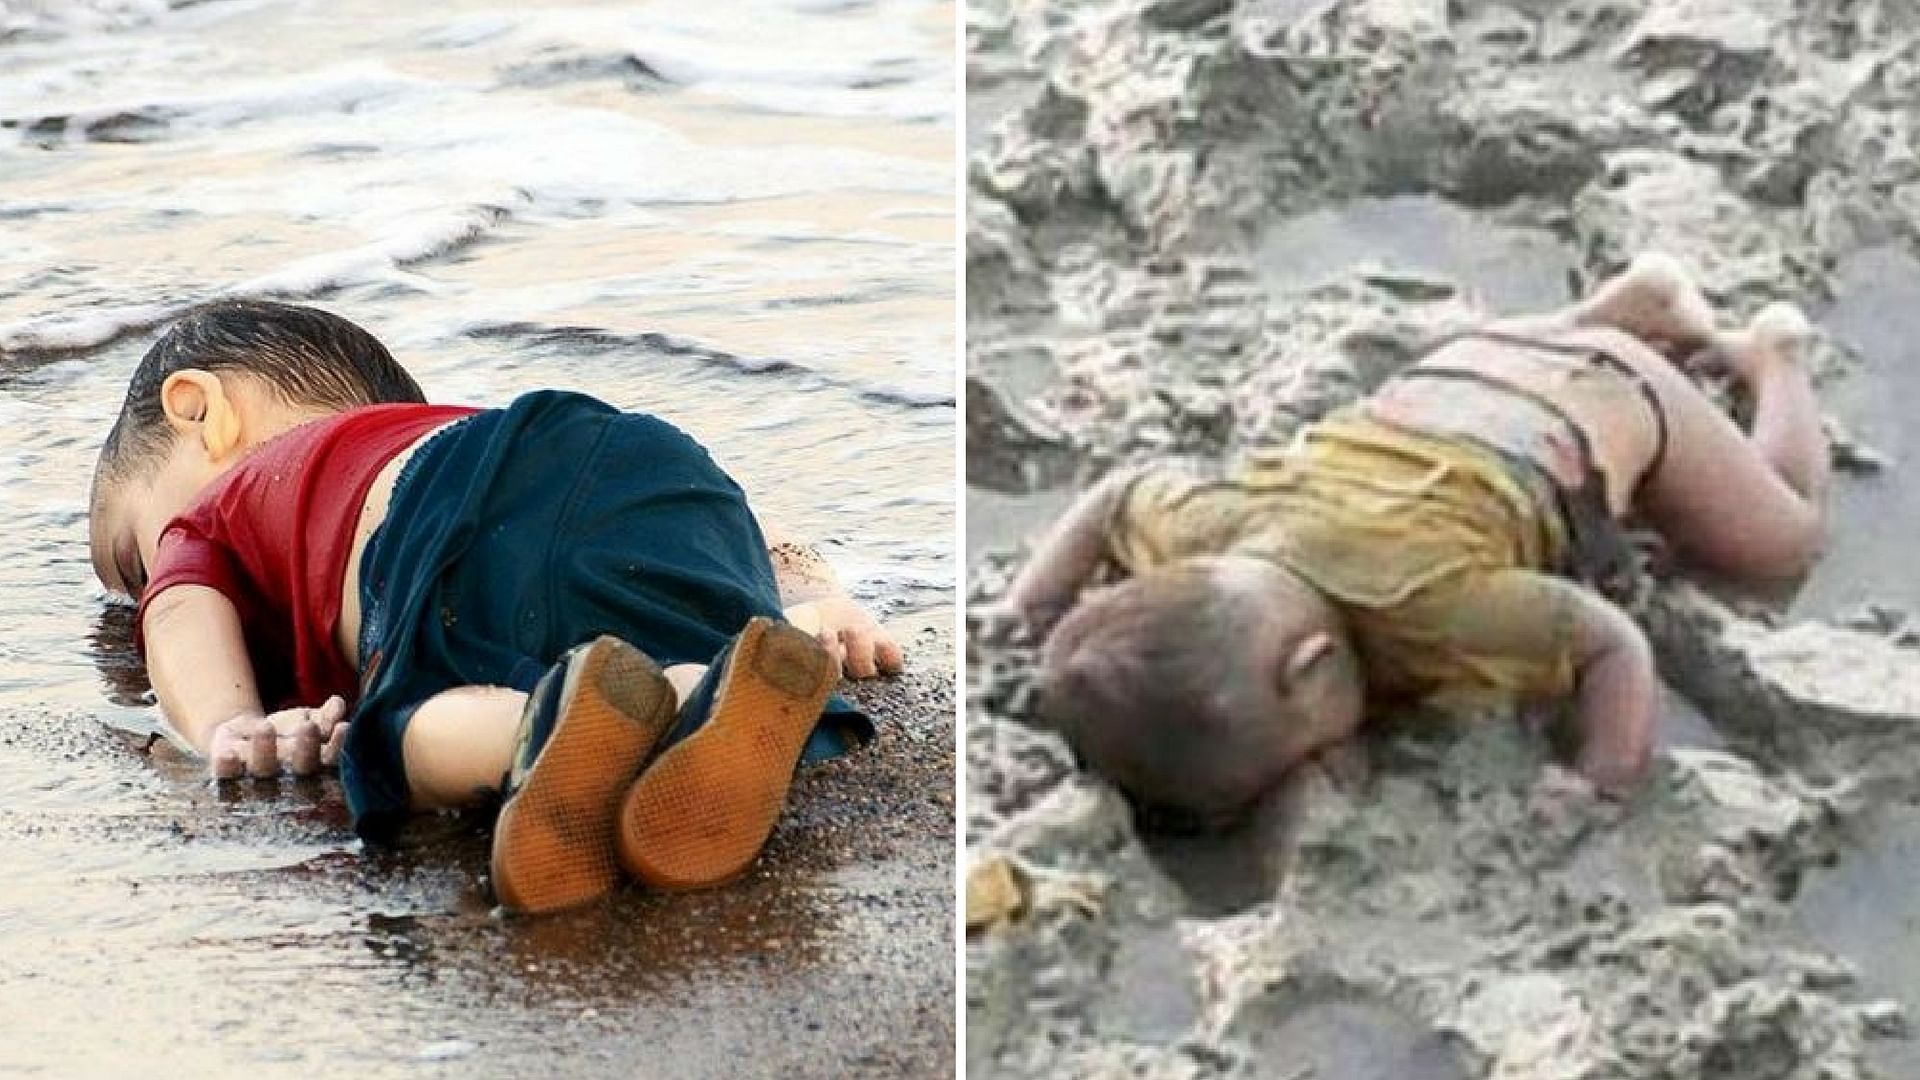 Three-year-old Syrian boy Aylan Kurdi’s body was found on a beach in Turkey (left); 16- month-old Rohingya child Mohammed Shohayet drowned in Naf river. (Photo courtesy: <a href="https://twitter.com/AngryBritAbroad">@AngryBritAbroad</a>, ‏<a href="https://twitter.com/mizanbd420">@mizanbd420</a>/Twitter)